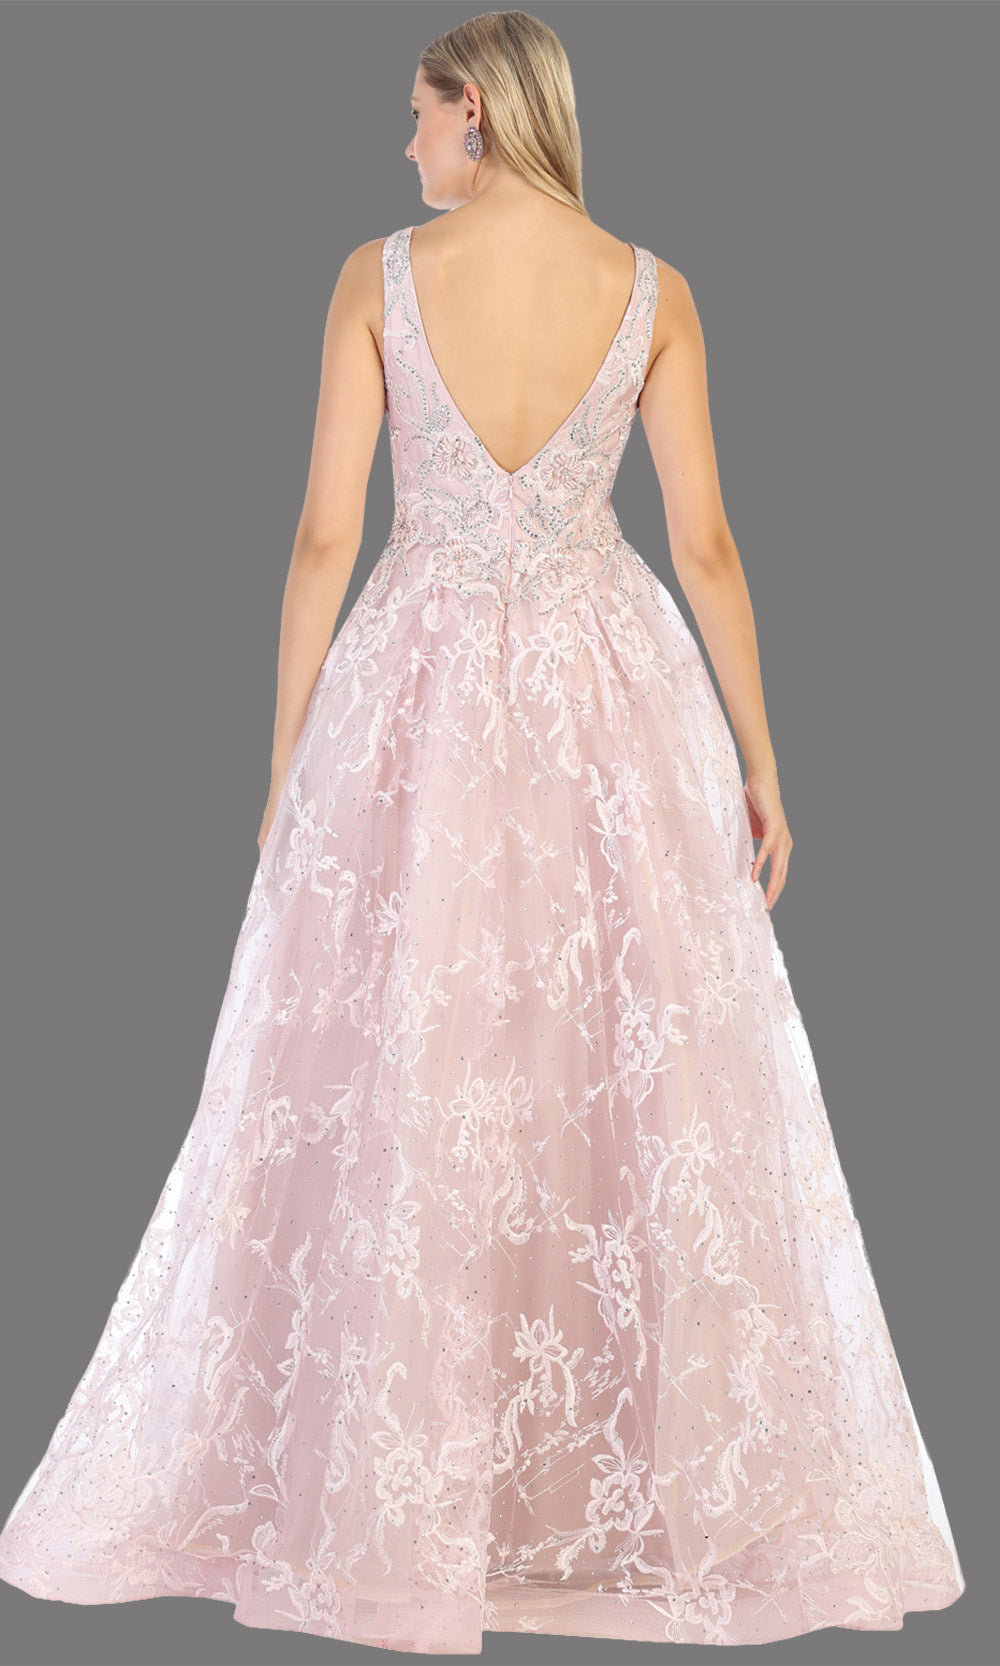 Mayqueen RQ7801 long mauve v neck flowy floral lace taffeta dress. Perfect dusty rose dress for prom, engagement dress, e-shoot dress, formal wedding guest dress, debut, quinceanera, sweet 16, gala. Plus sizes avail in this light pink semi ballgown-b.jpg